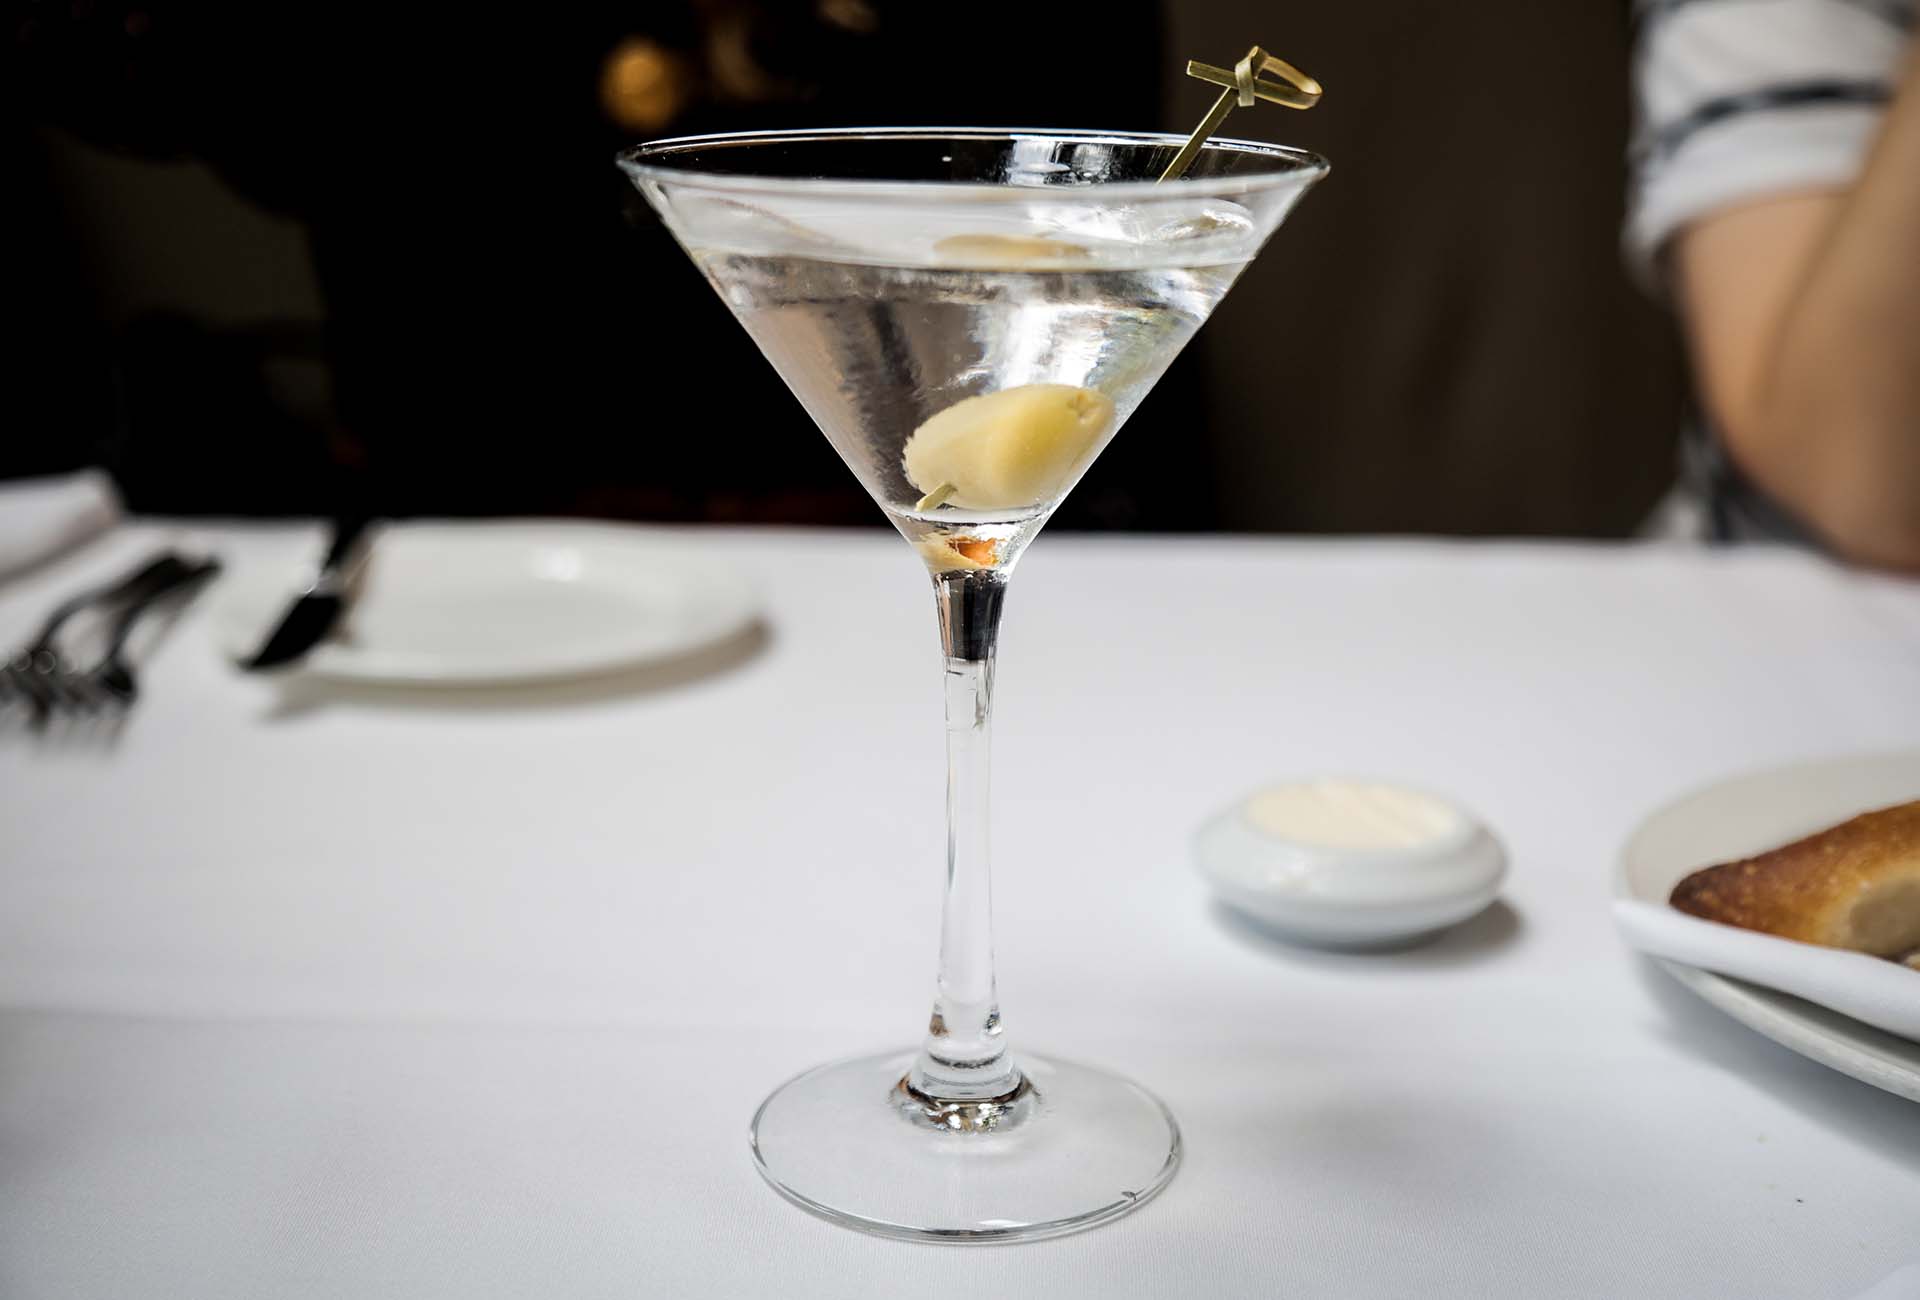 The $5 gin martini from One Market's lunch cocktail menu